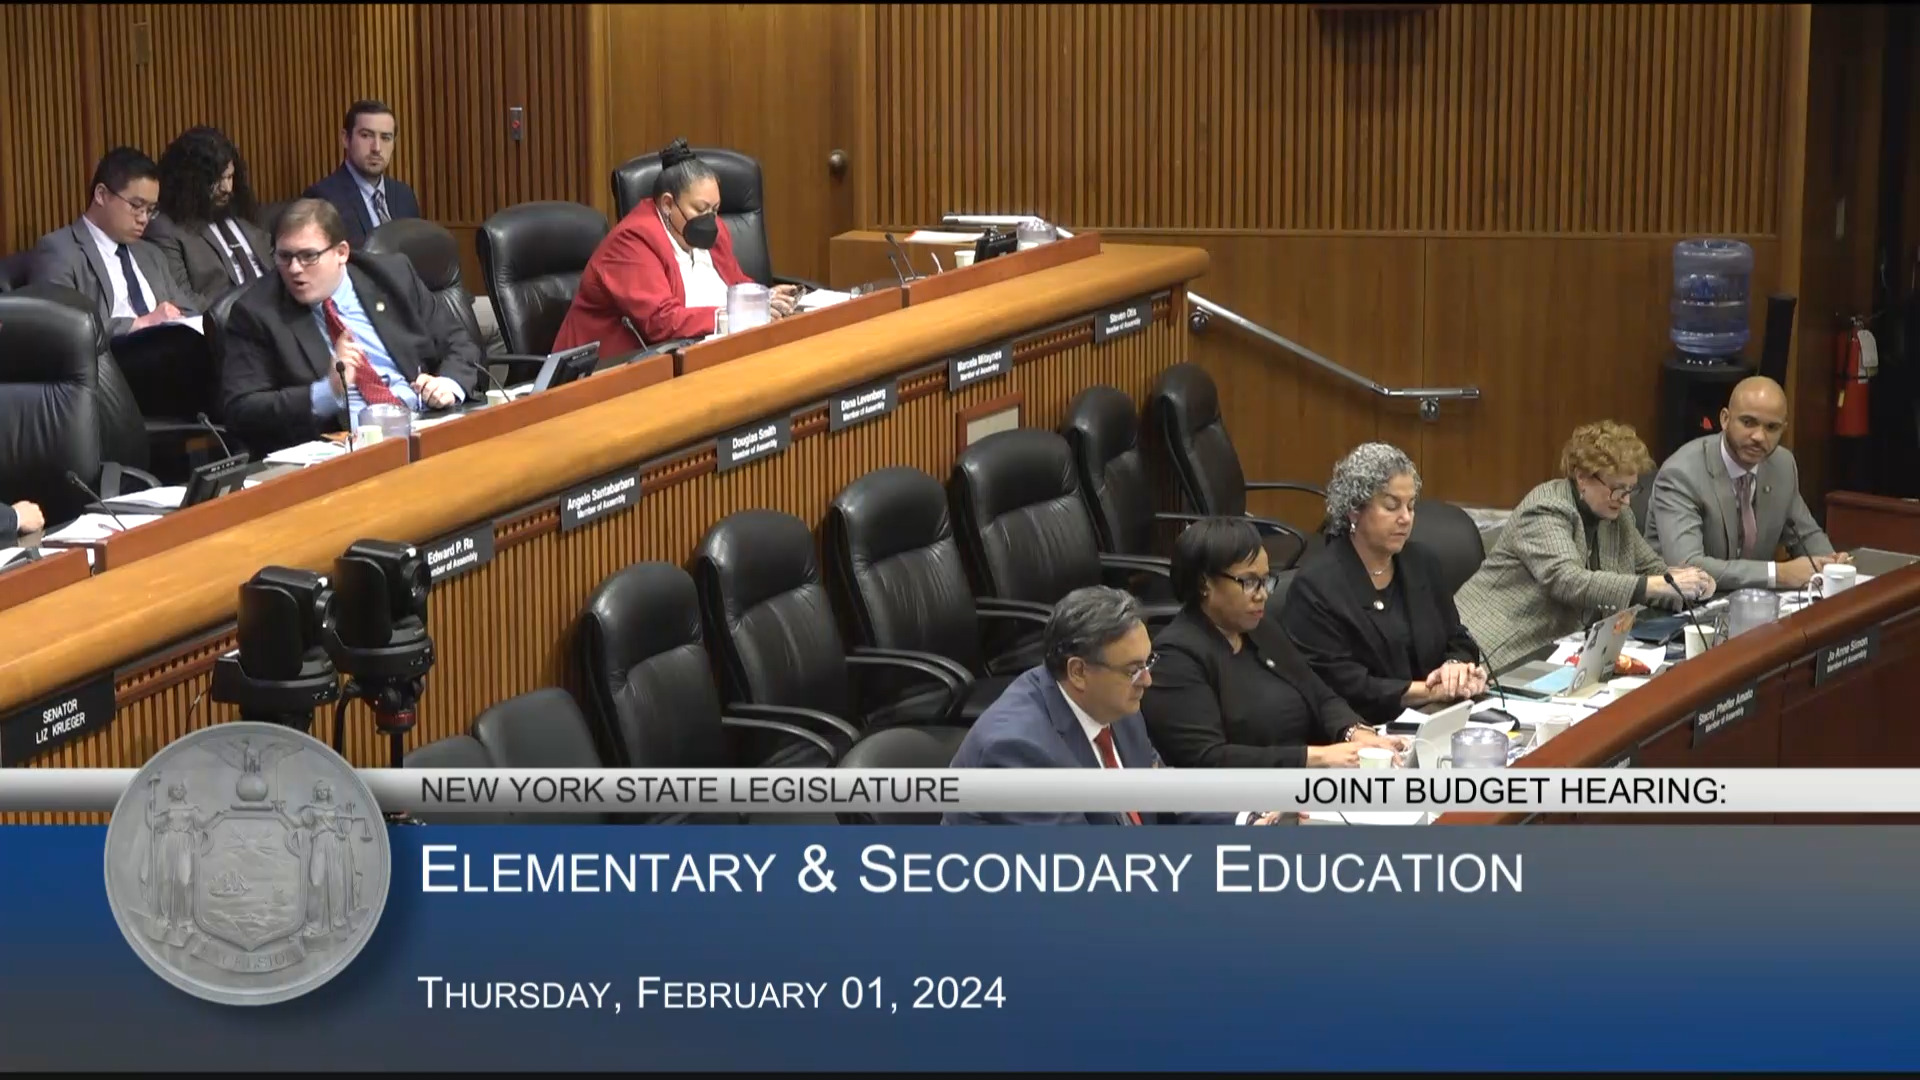 NYC Dept. Of Education Chancellor Testifies During Budget Hearing on Elementary and Secondary Education